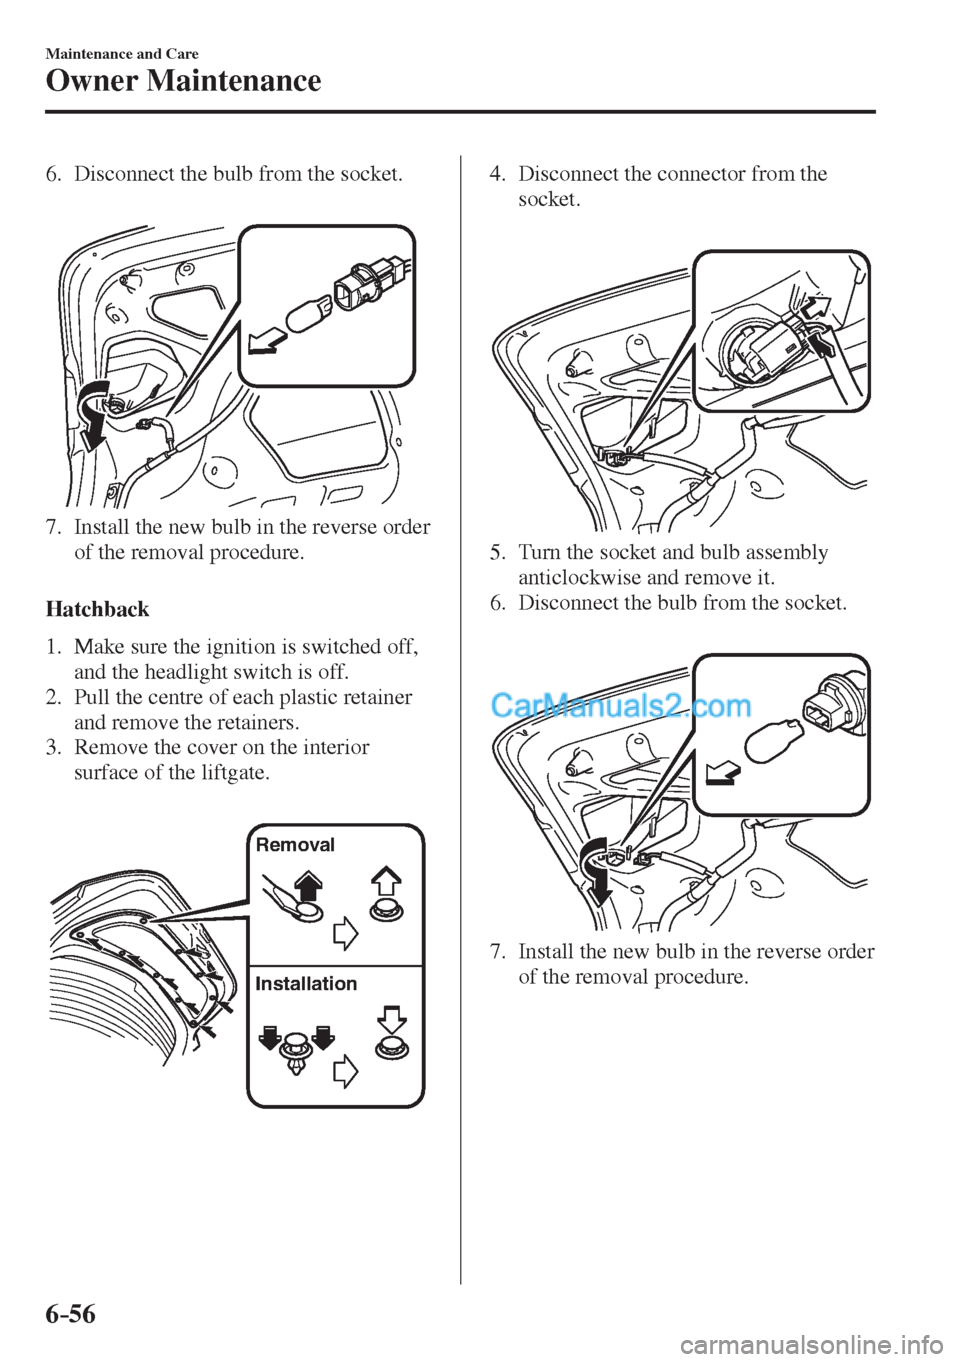 MAZDA MODEL 2 2017  Owners Manual (in English) 6–56
Maintenance and Care
Owner Maintenance
   6.   Disconnect the bulb from the socket.
   
 
 
   7.   Install the new bulb in the reverse order 
of the removal procedure.
    
  Hatchback
     1.